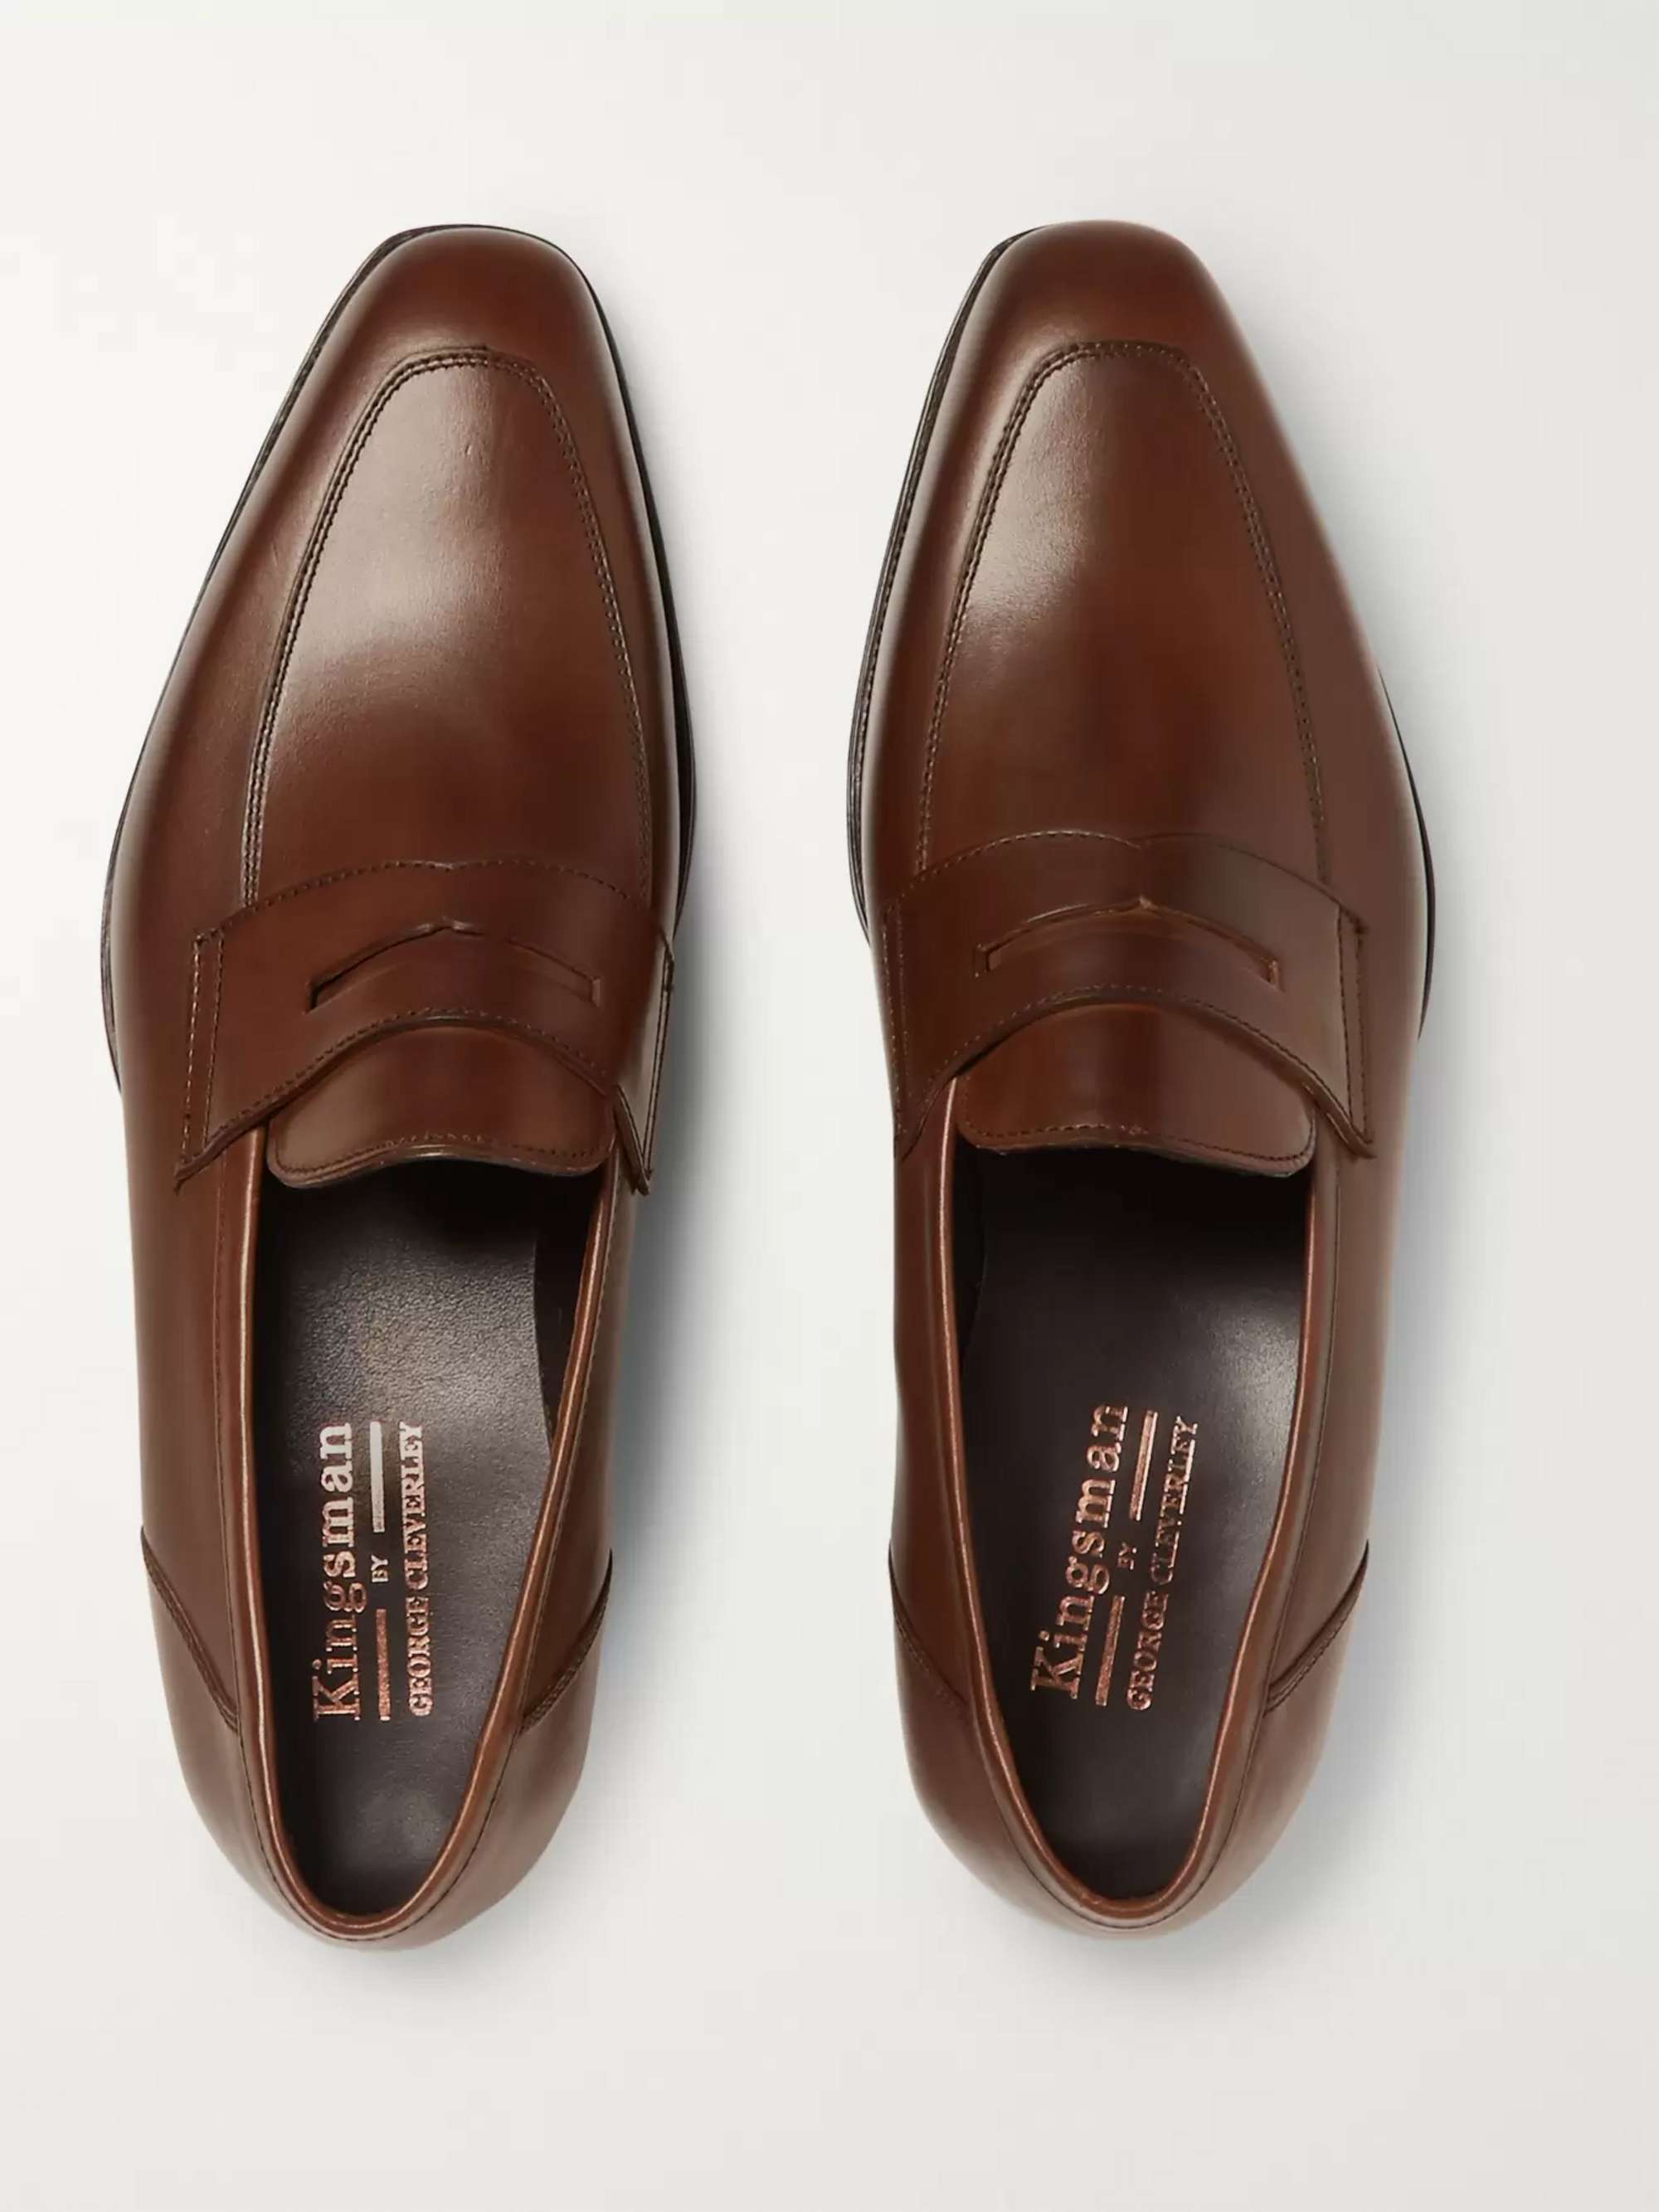 KINGSMAN + George Cleverley Newport Leather Penny Loafers | MR PORTER